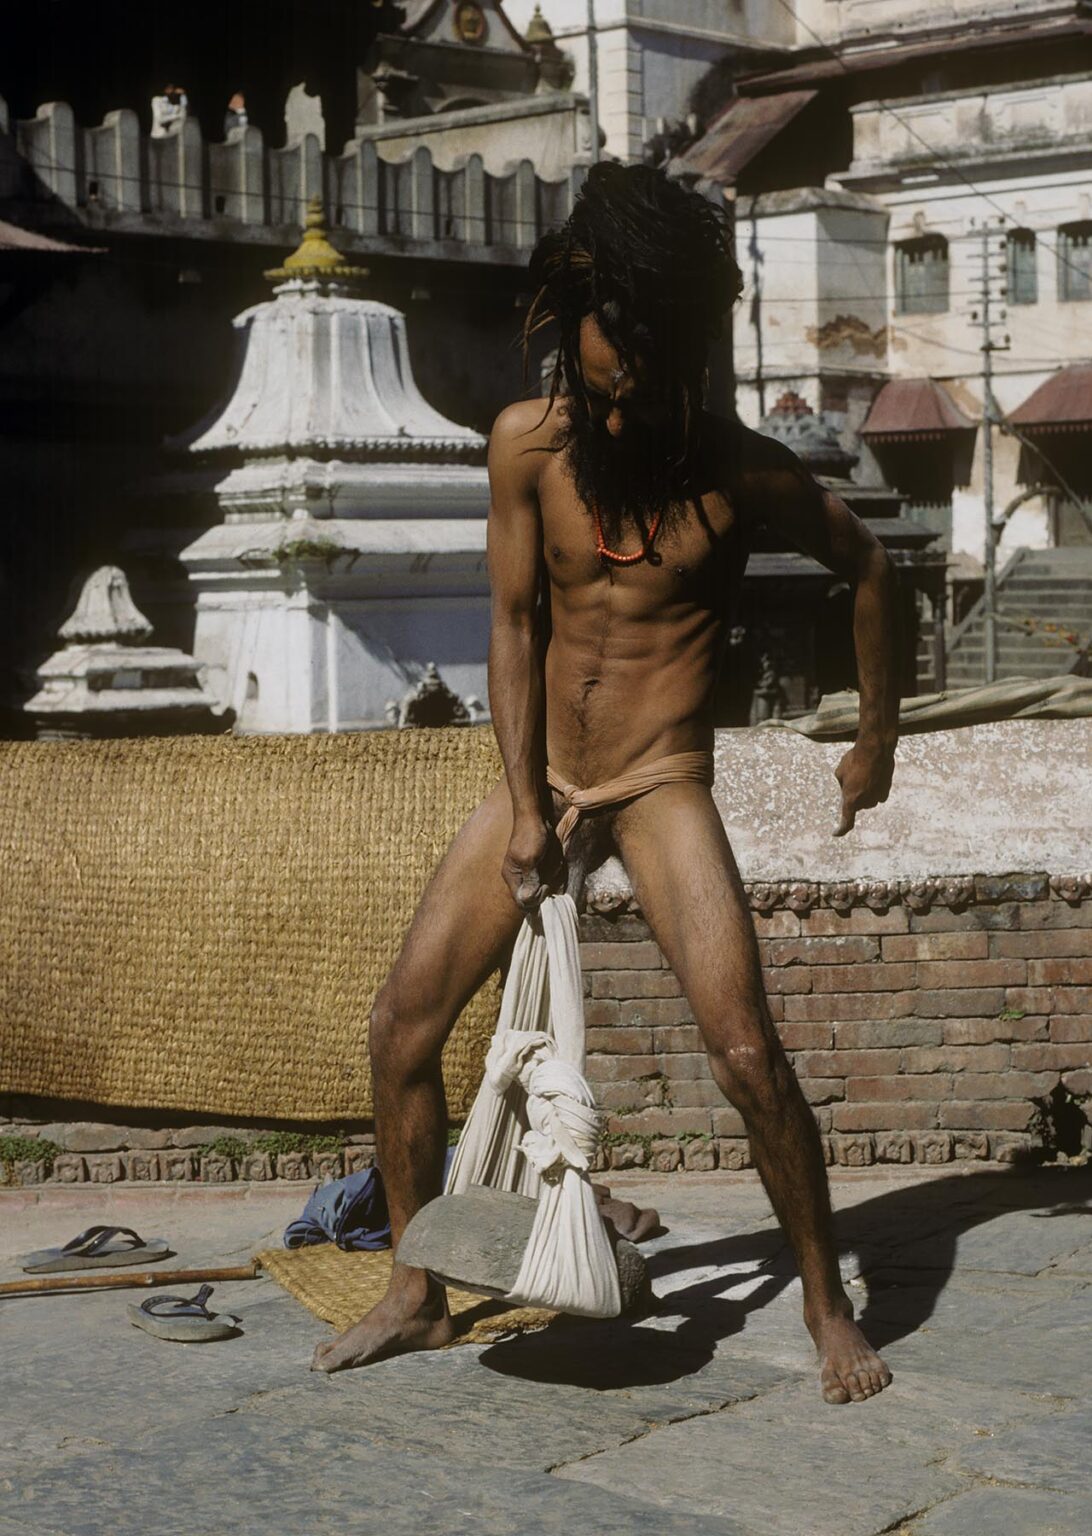 A SADHU (Hindu Renunciate) does a TANTRIC YOGA practice by lifting heavy rocks with his penis at PASHUPATINATH